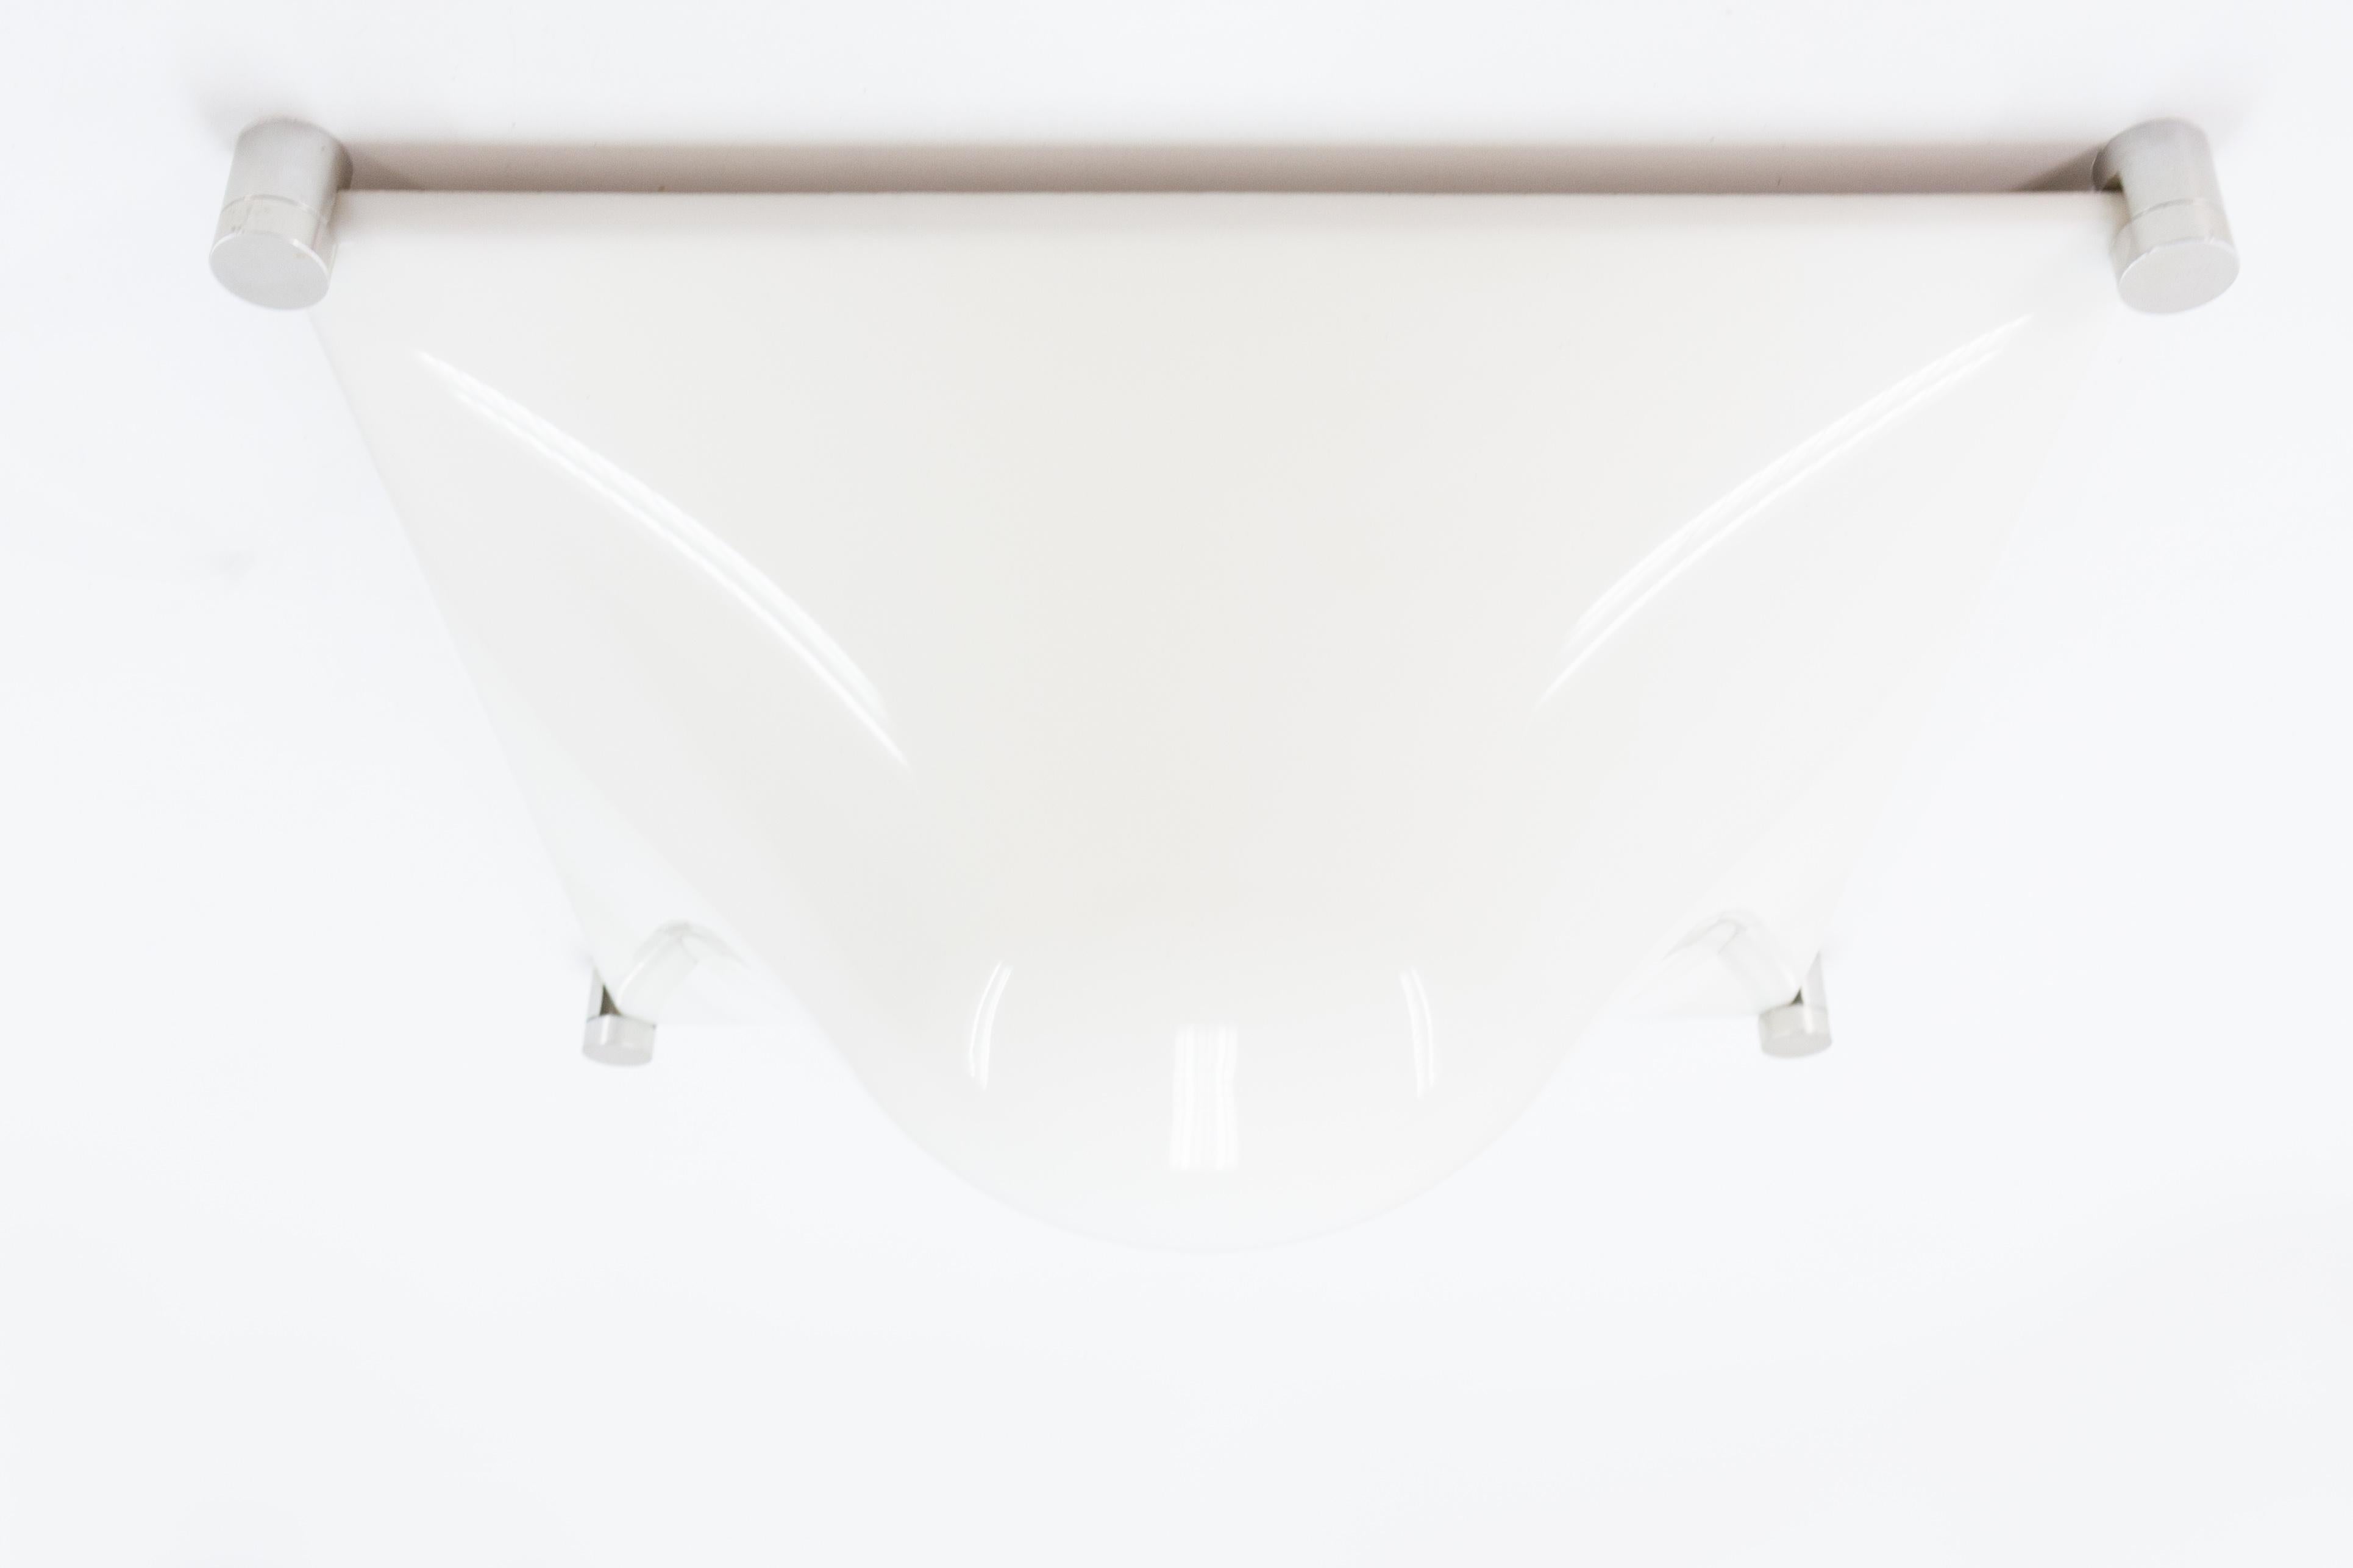 Space Age Elio Martinelli Bollo Ceiling or Wall Light